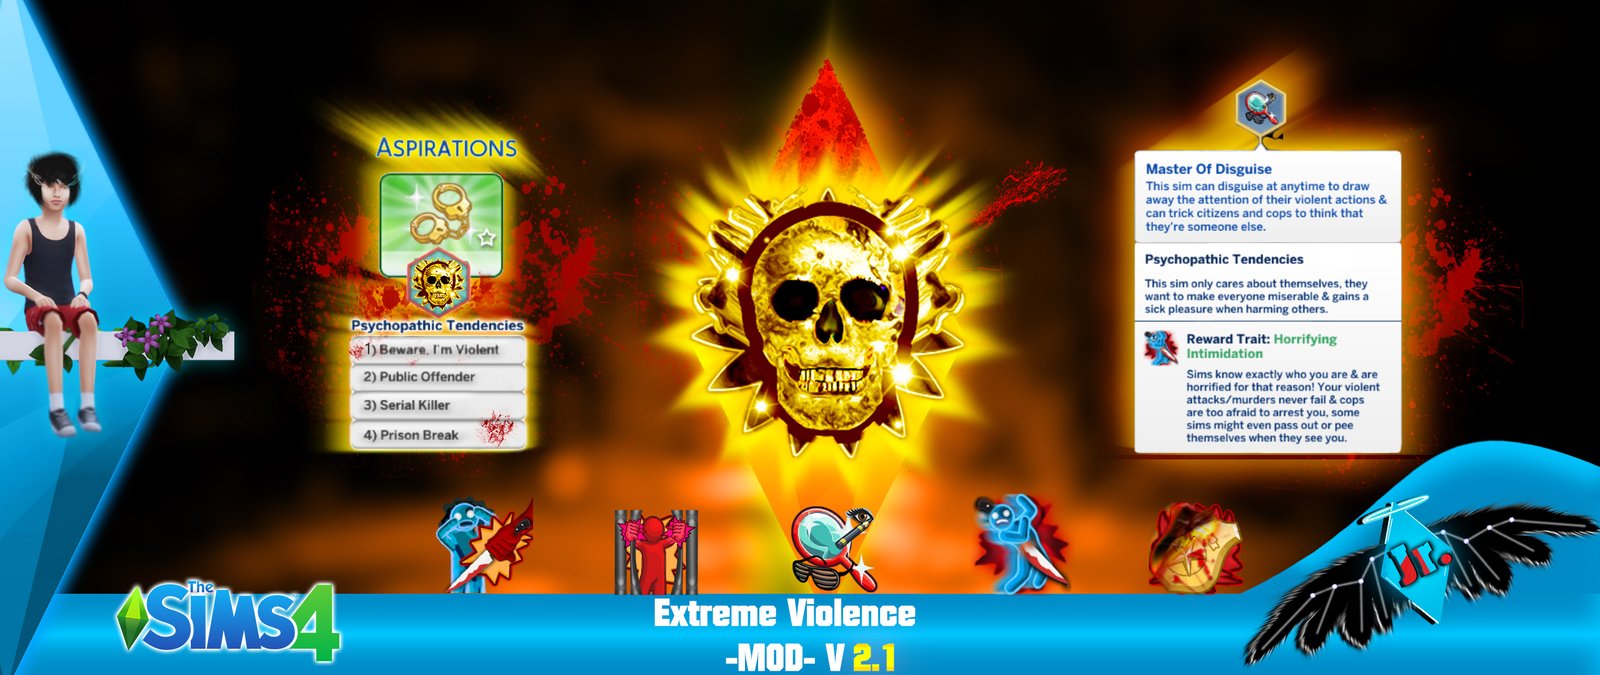 extreme violence mod sims 4 latest update